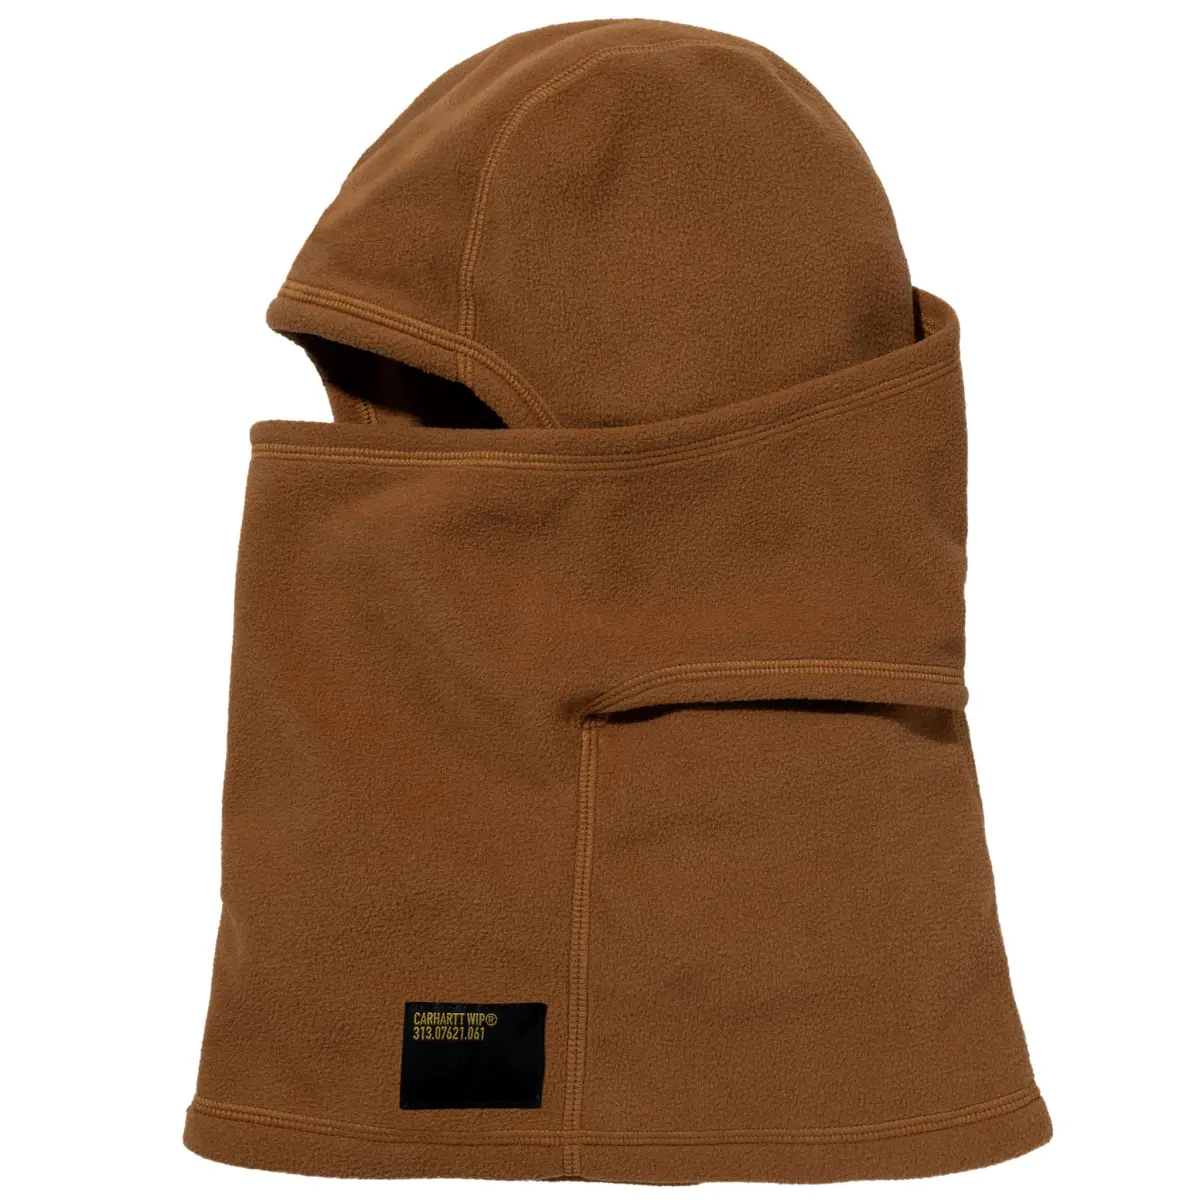 CARHARTT WIP MISSION MASK BROWN